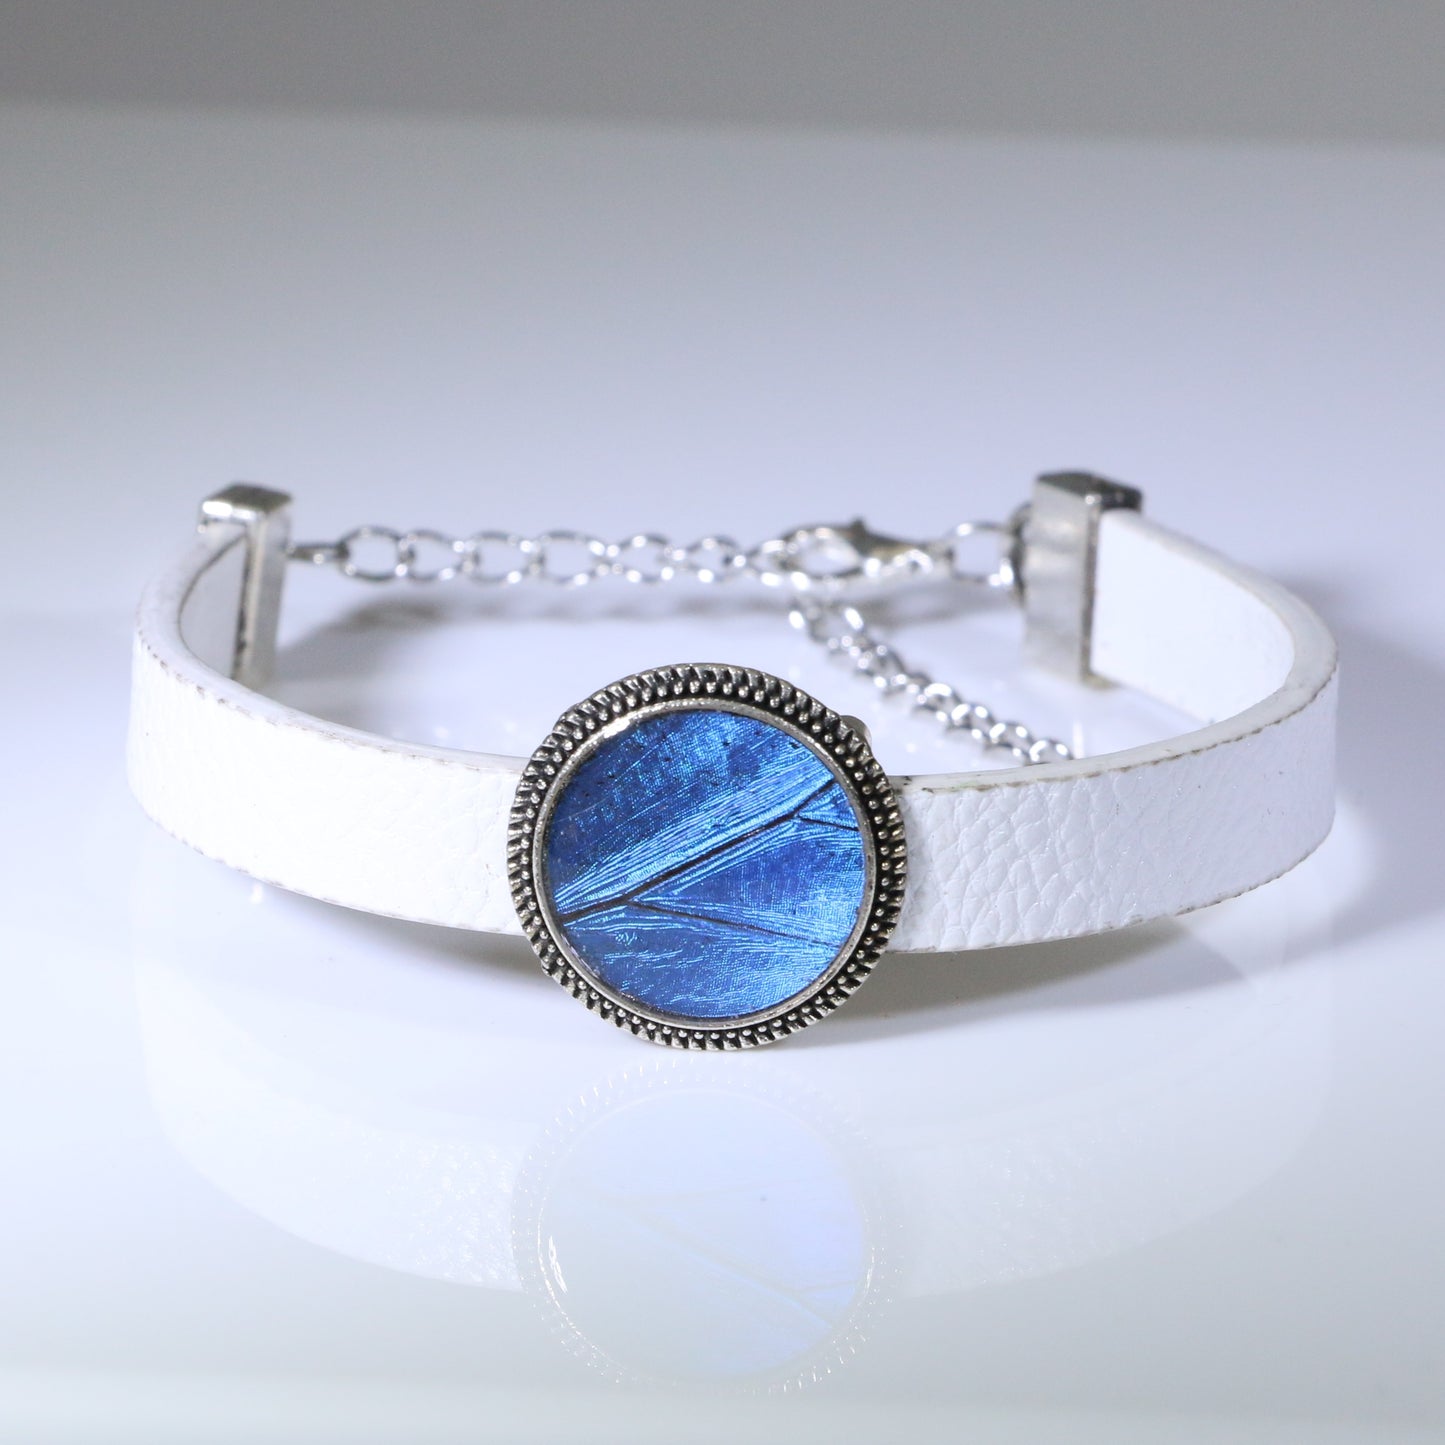 53301 - Real Butterfly Wing Jewelry - Bracelets - Round - Small - White - Blue Morpho